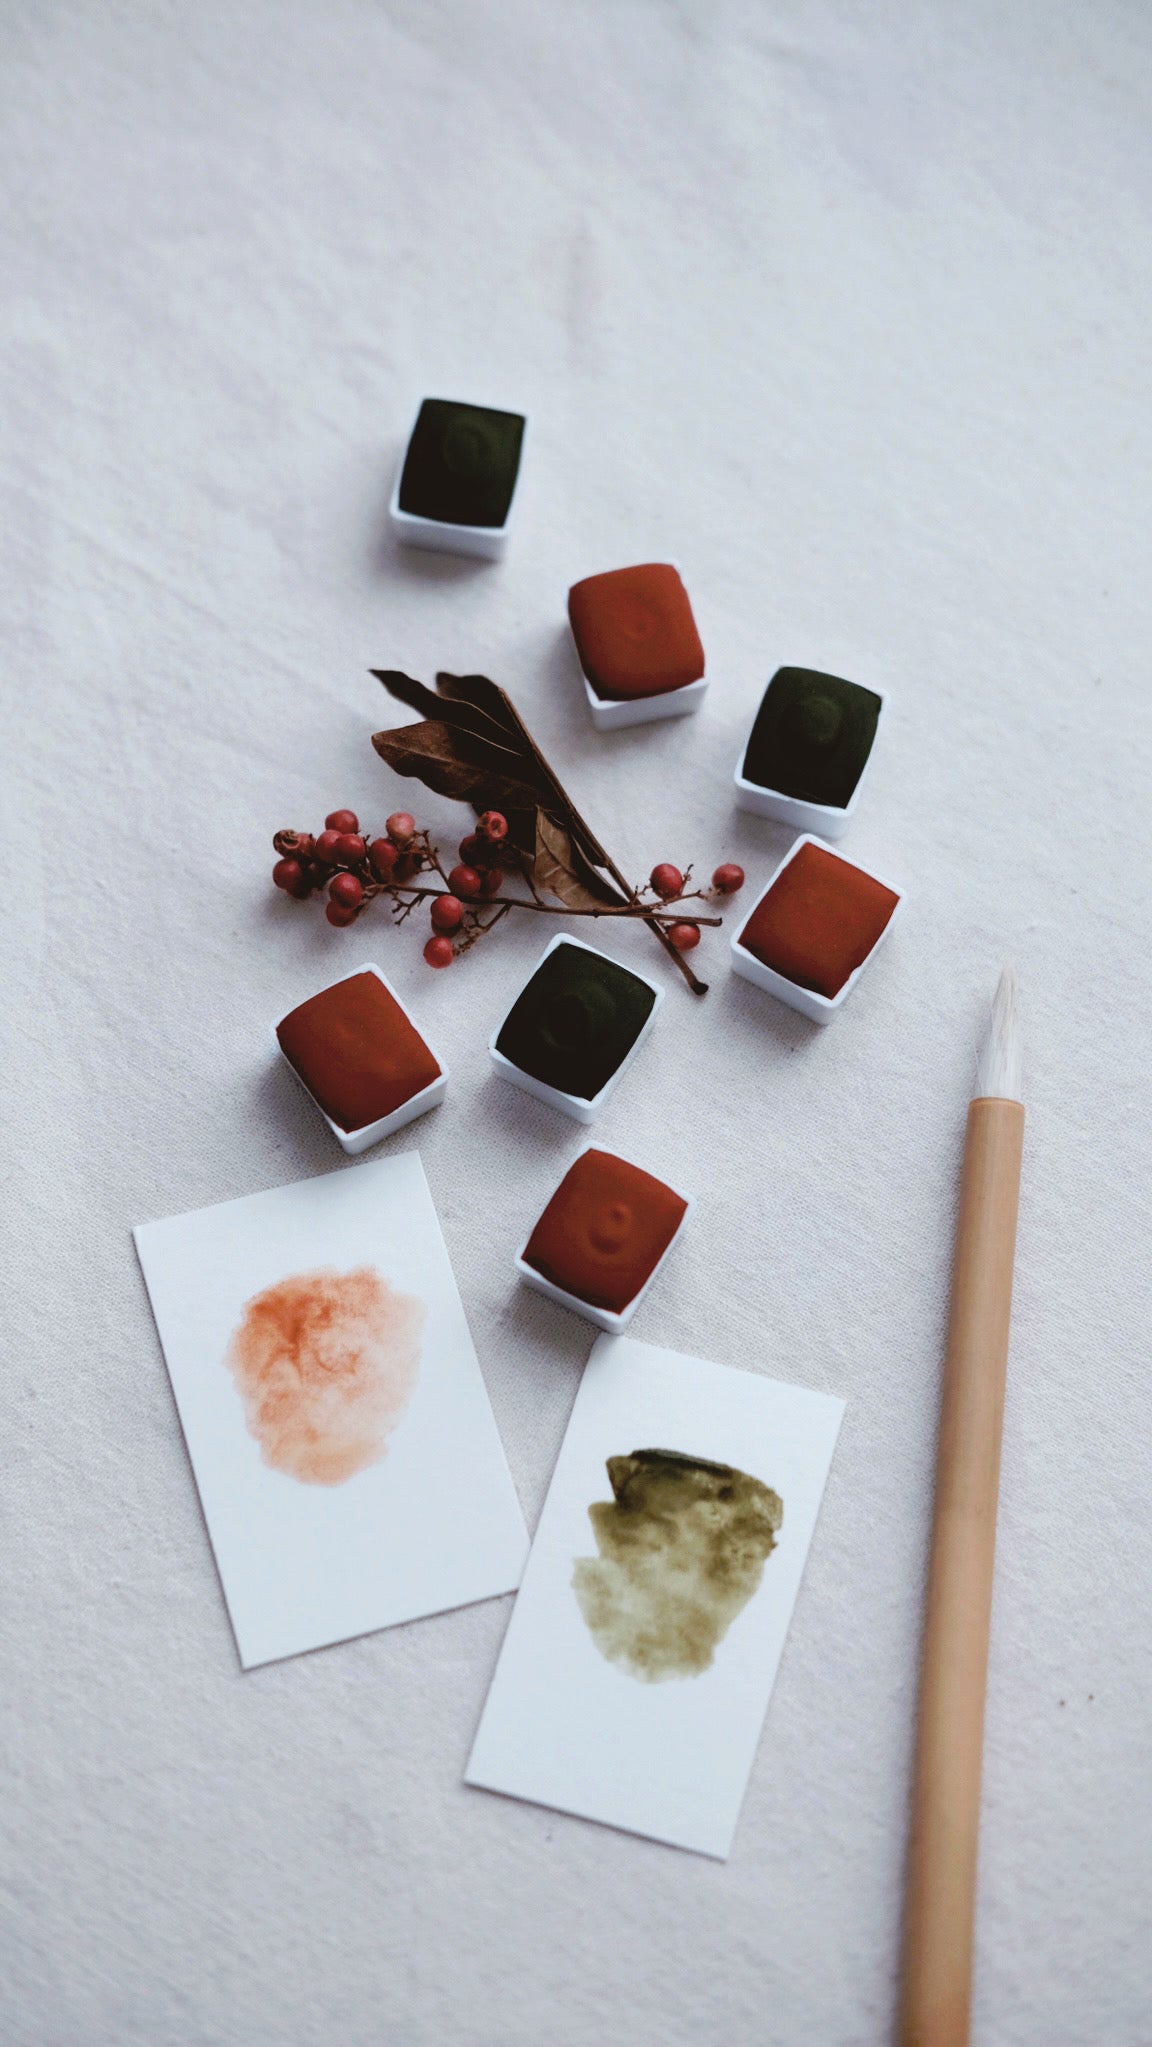 Winterberry  + Limited edition gemstone watercolor